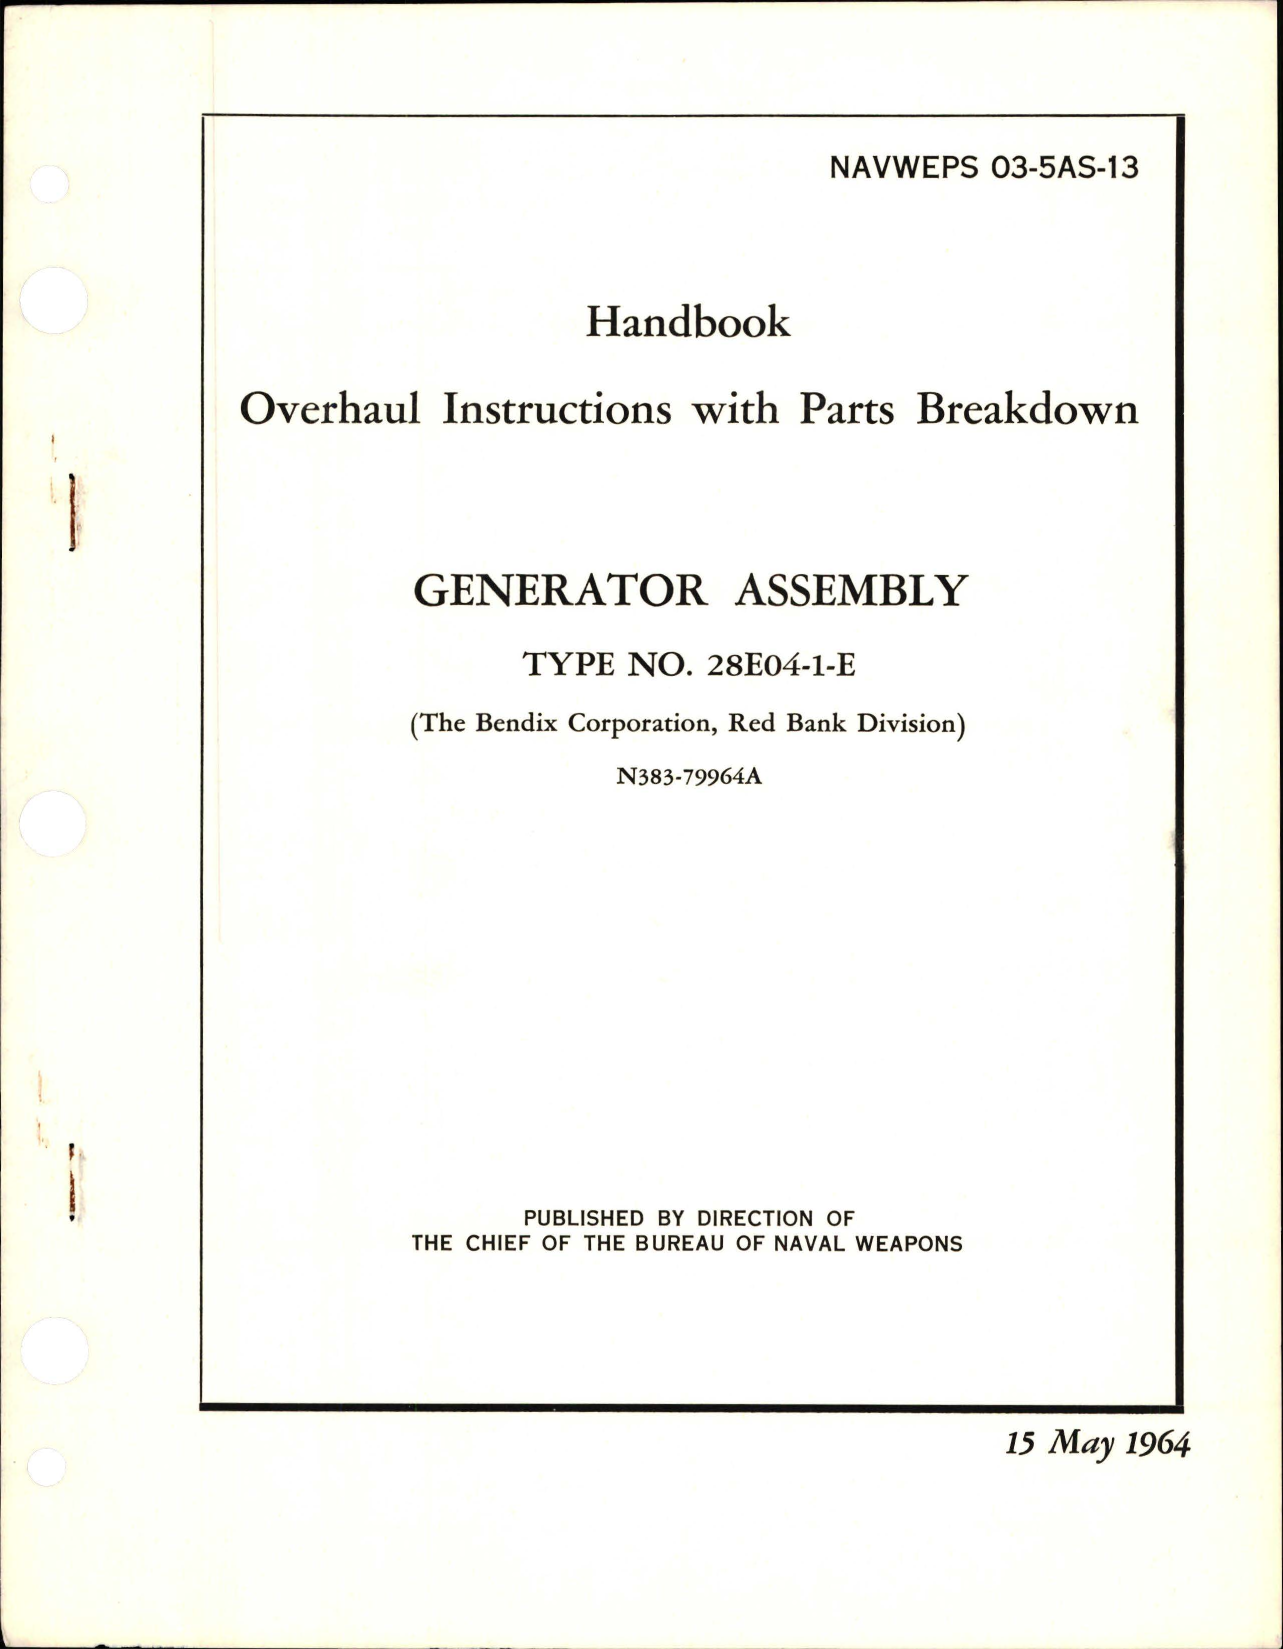 Sample page 1 from AirCorps Library document: Overhaul Instructions with Parts Breakdown for Generator Assembly - Type 28E04-1-E